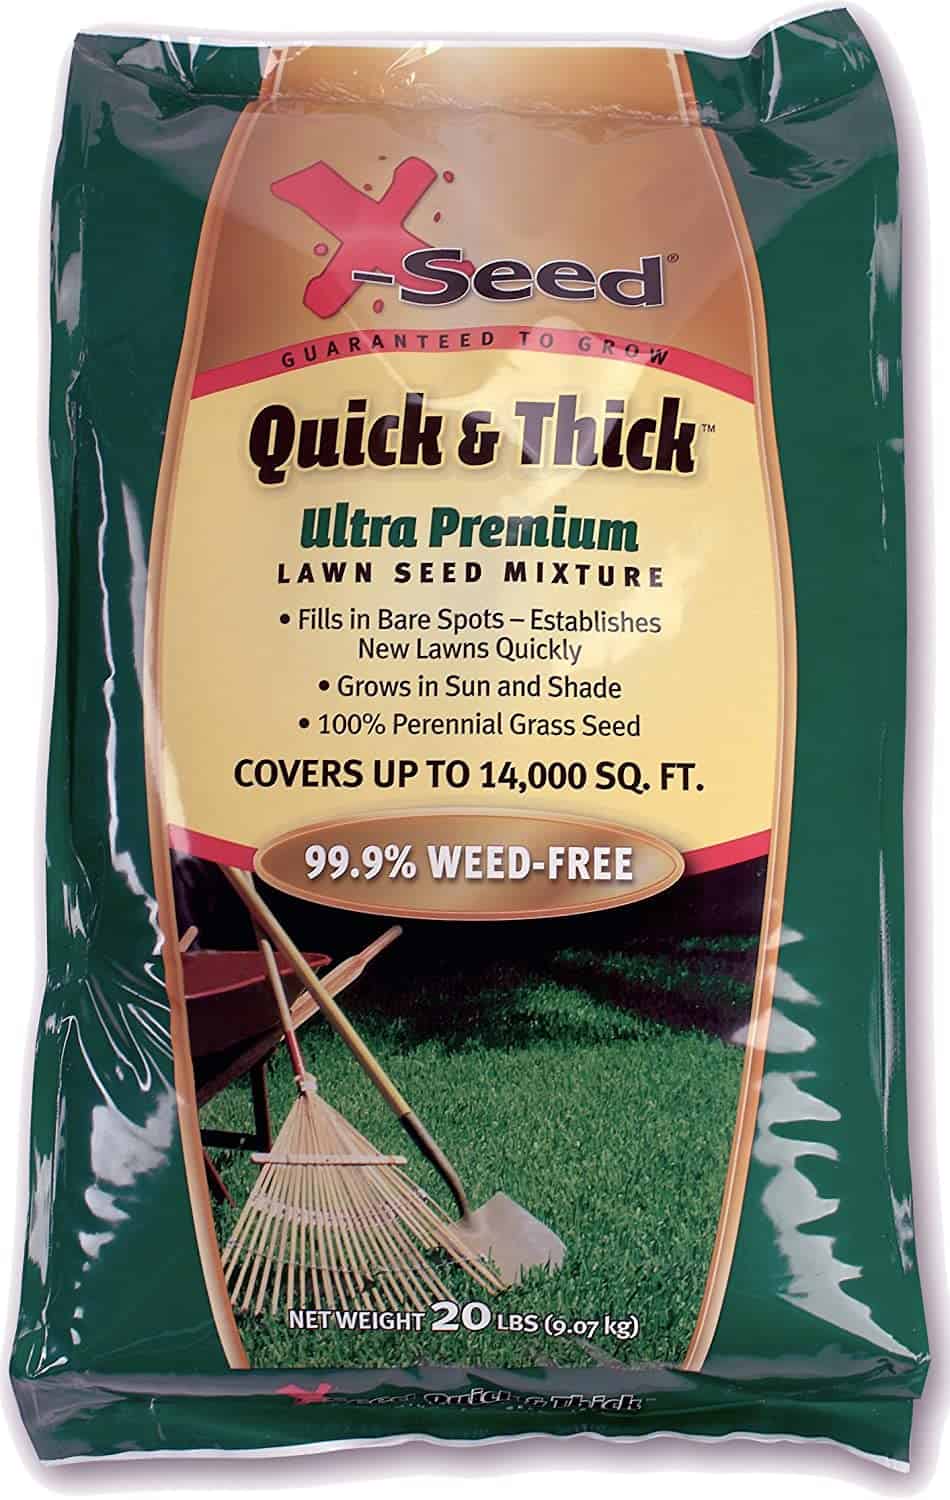 X-Seed Ultra Premium Quick and Thick Lawn Seed Mixture